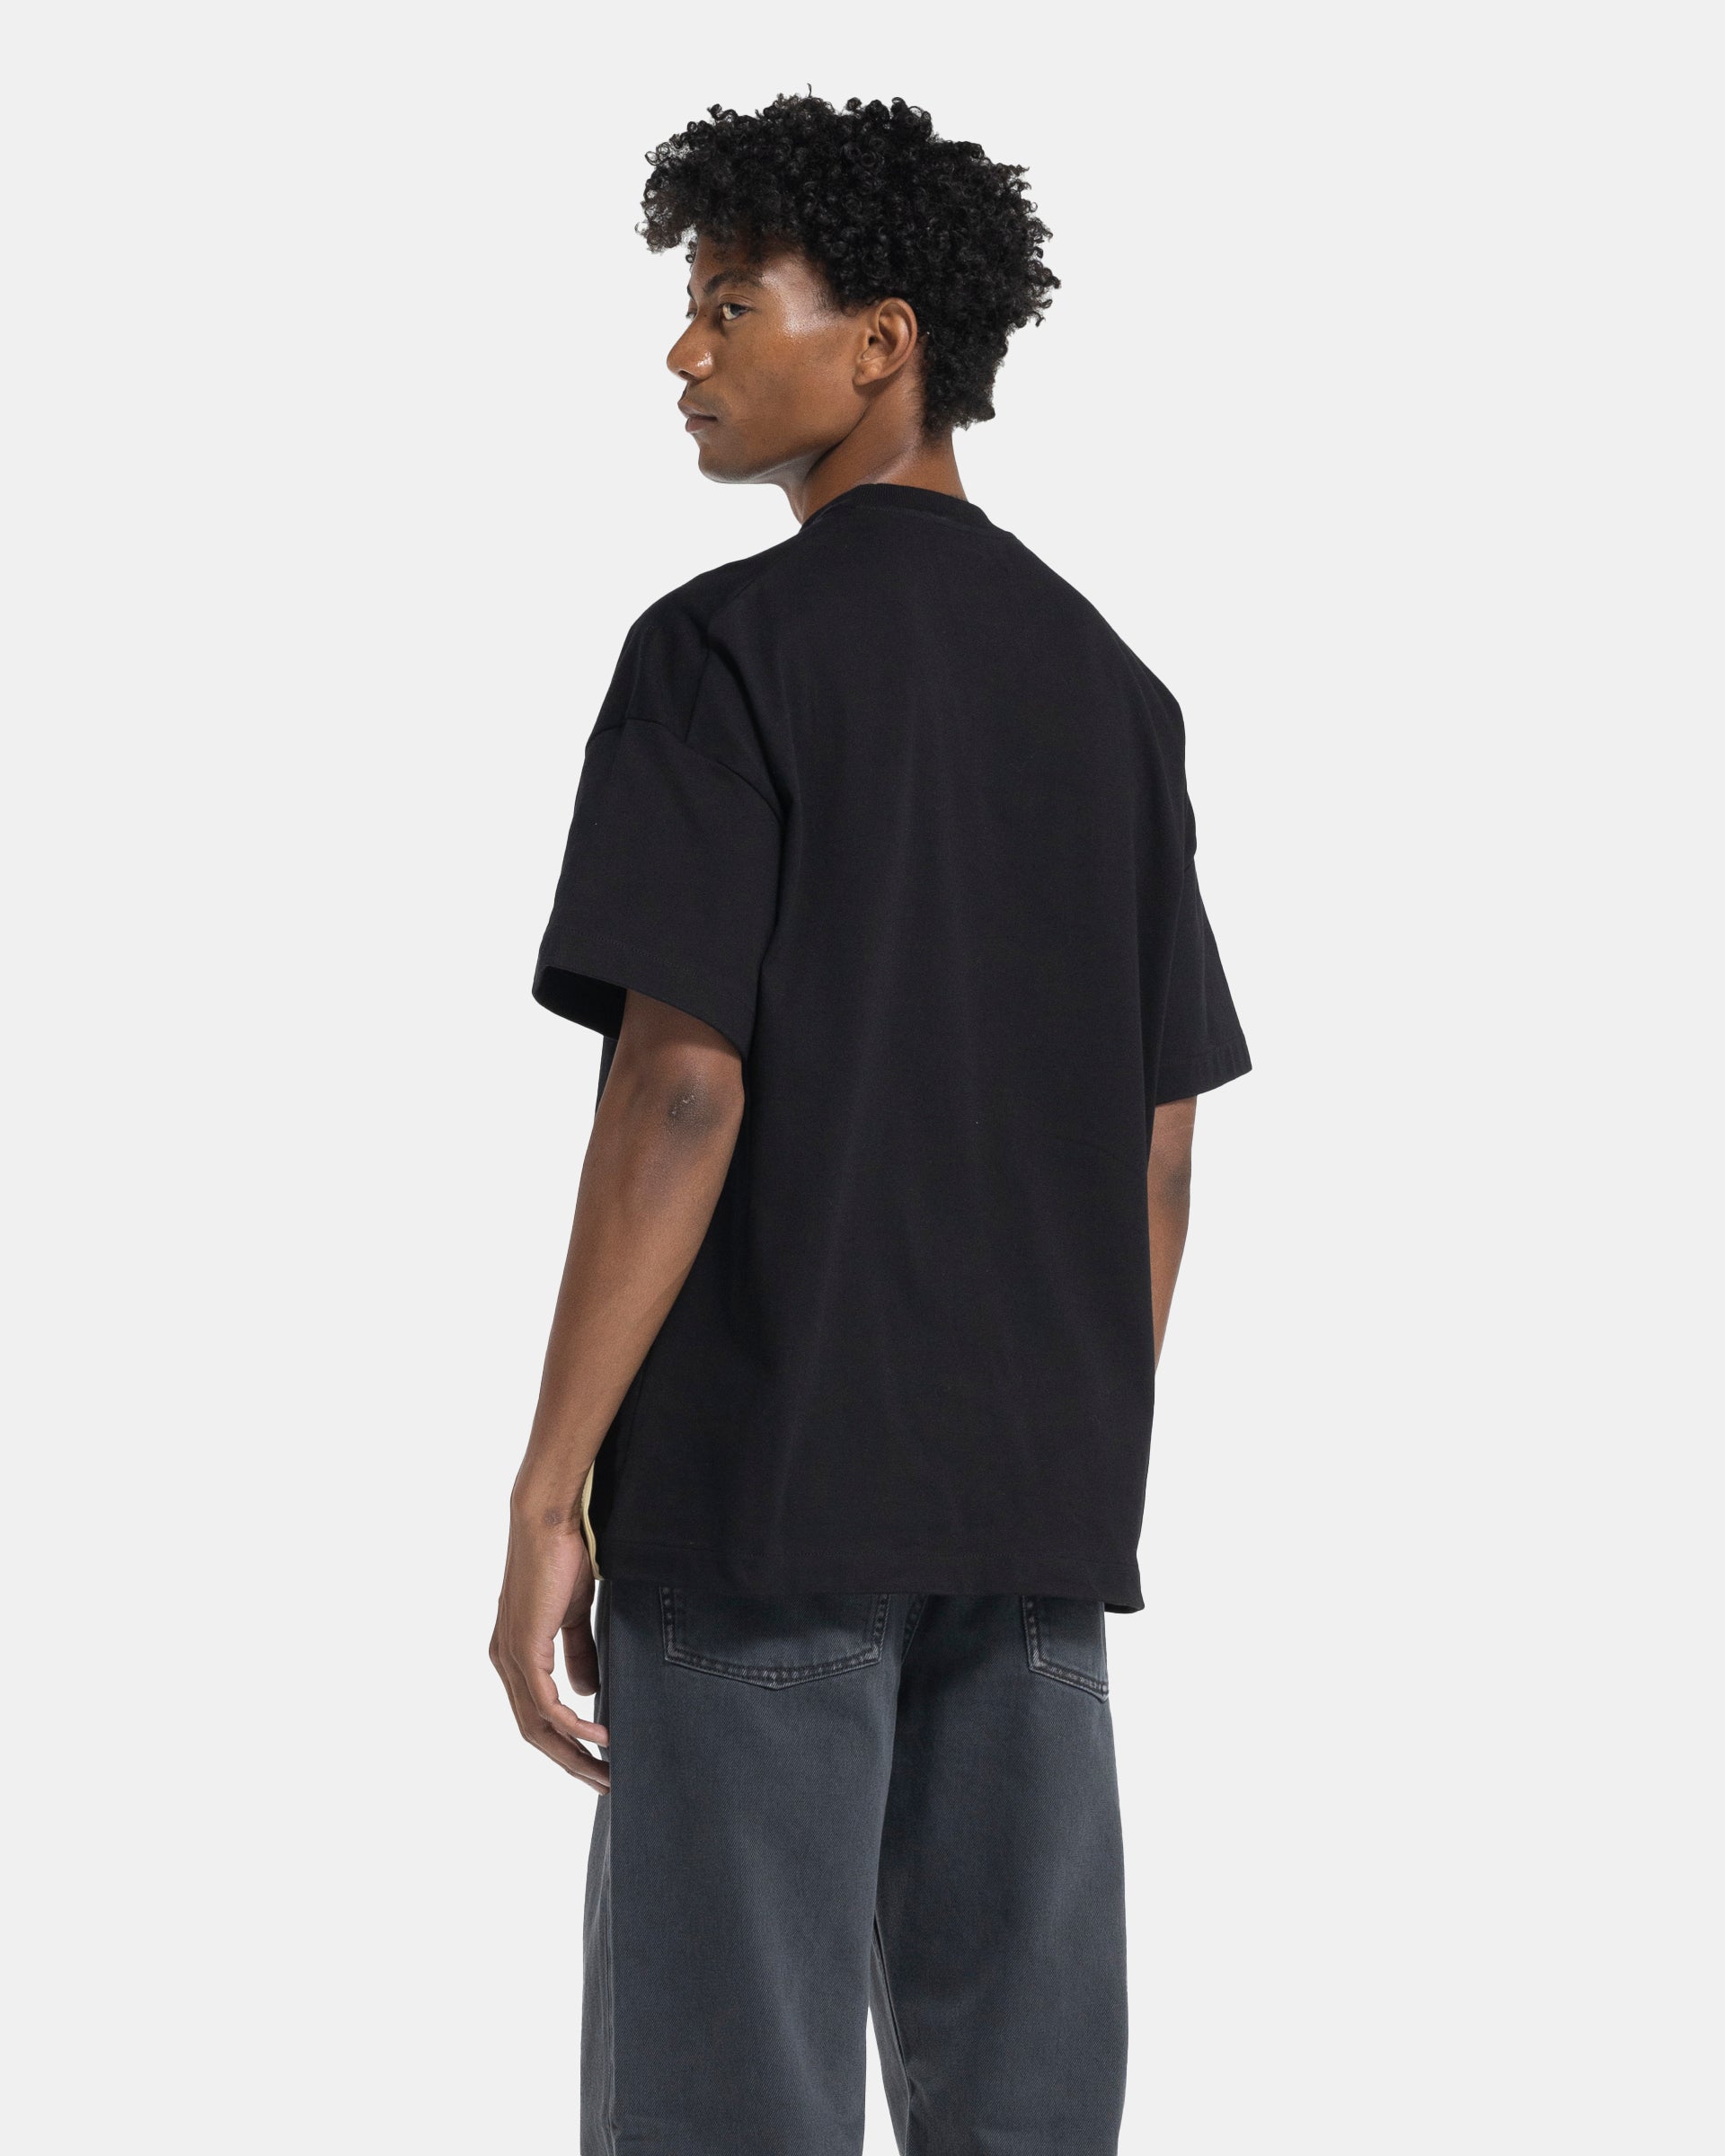 Patch T-Shirt in Black